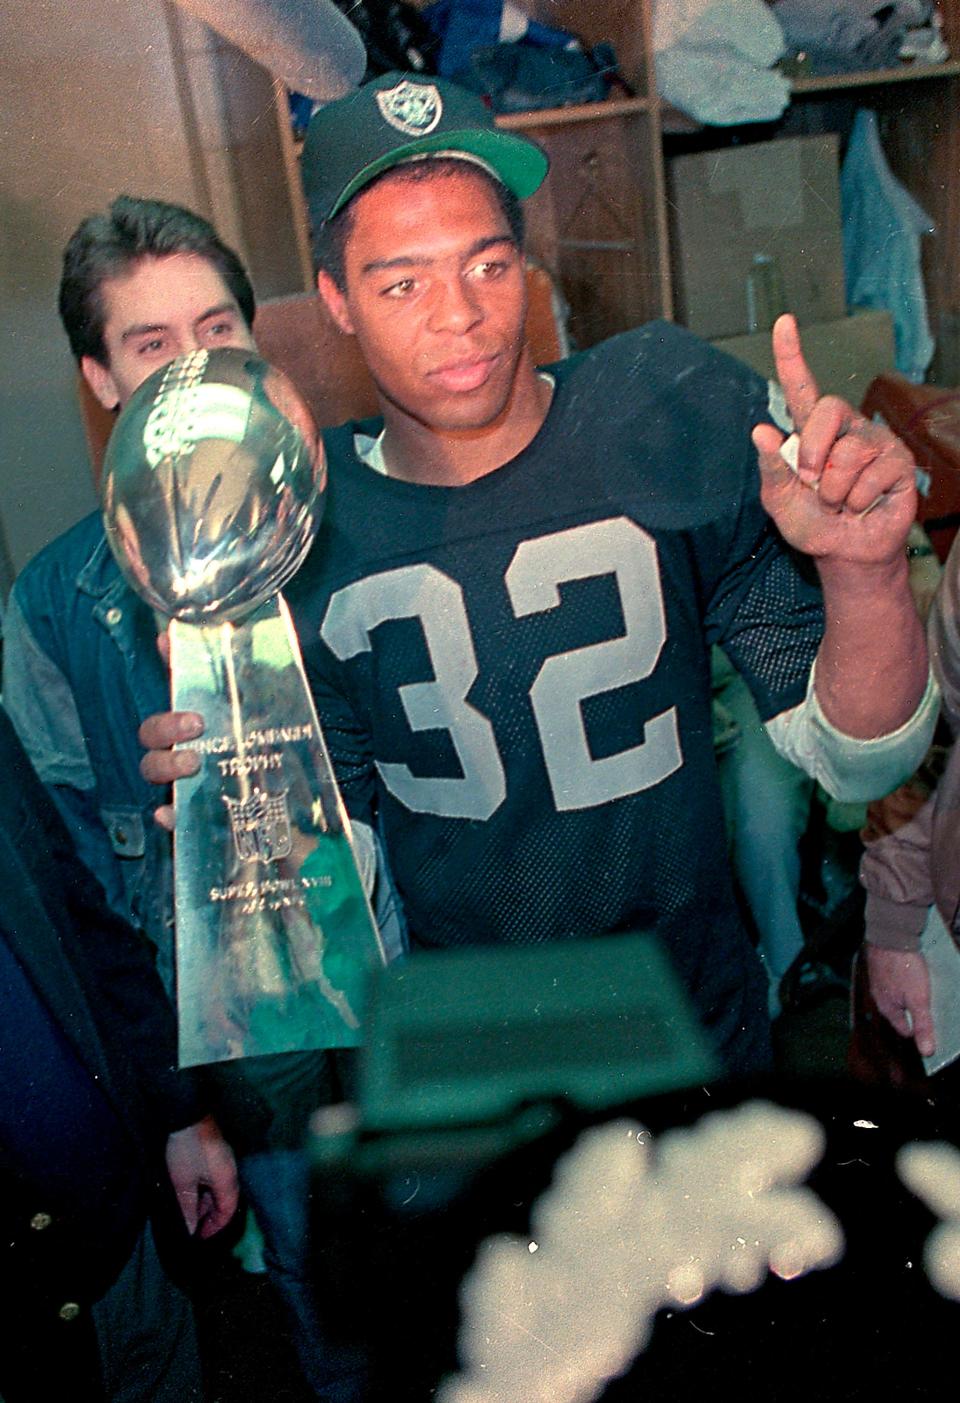 Raiders running back Marcus Allen, holding the Vince Lombardi Trophy after winning Super Bowl XVIII, was hoping the Detroit Lions made this year's game.